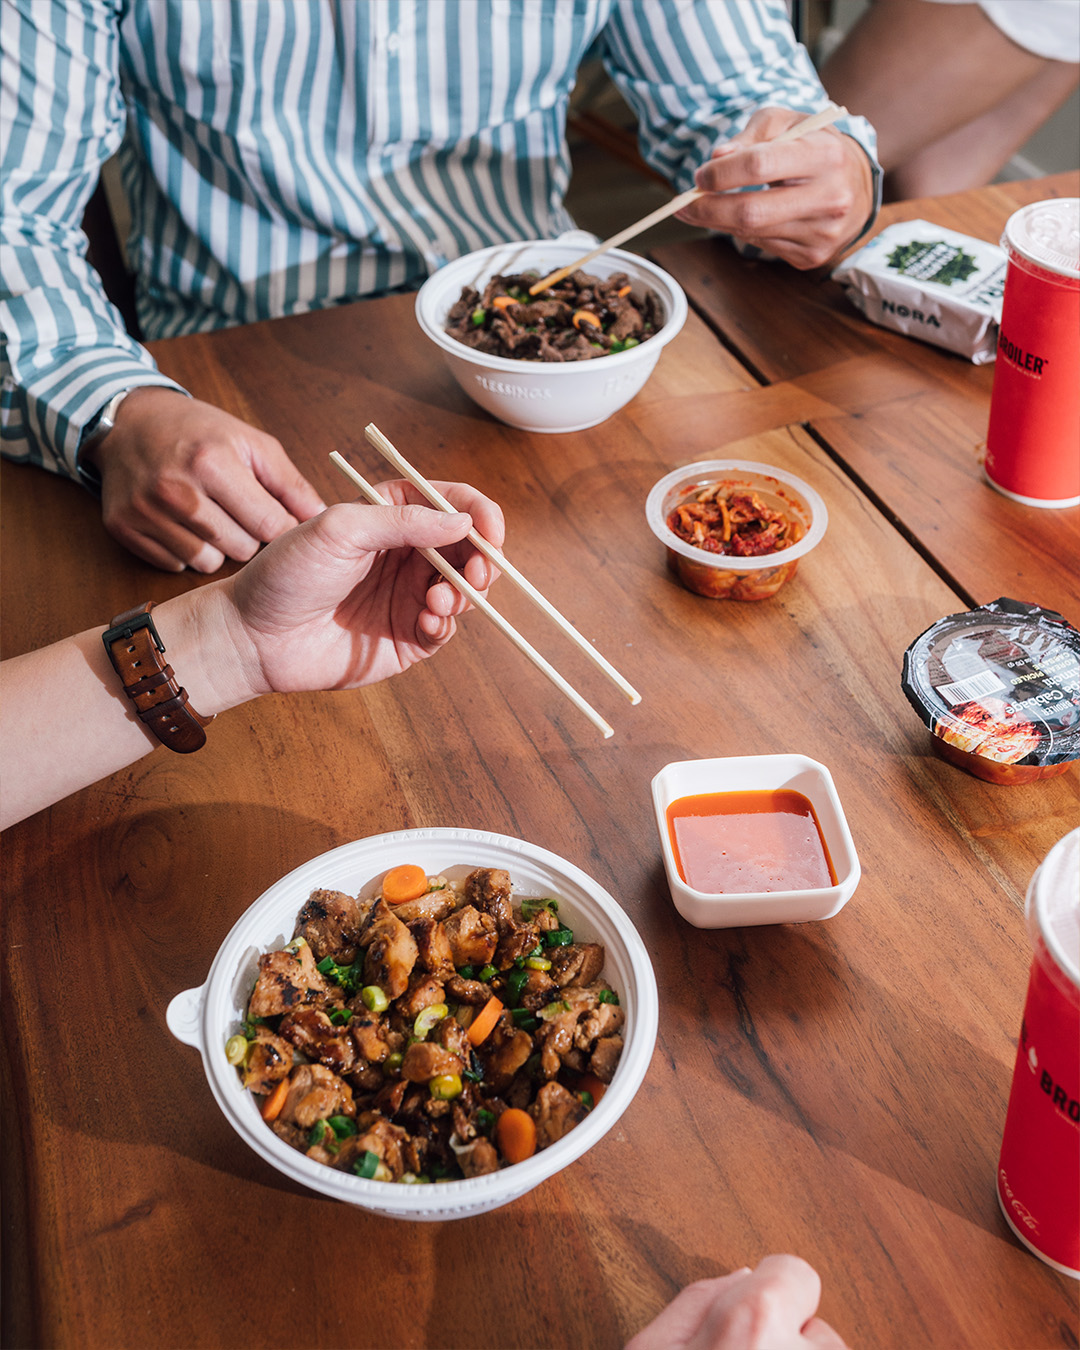 people sitting at the table eating bowls from the Flame Broiler with hashi and sauces - The Flame Broiler meu